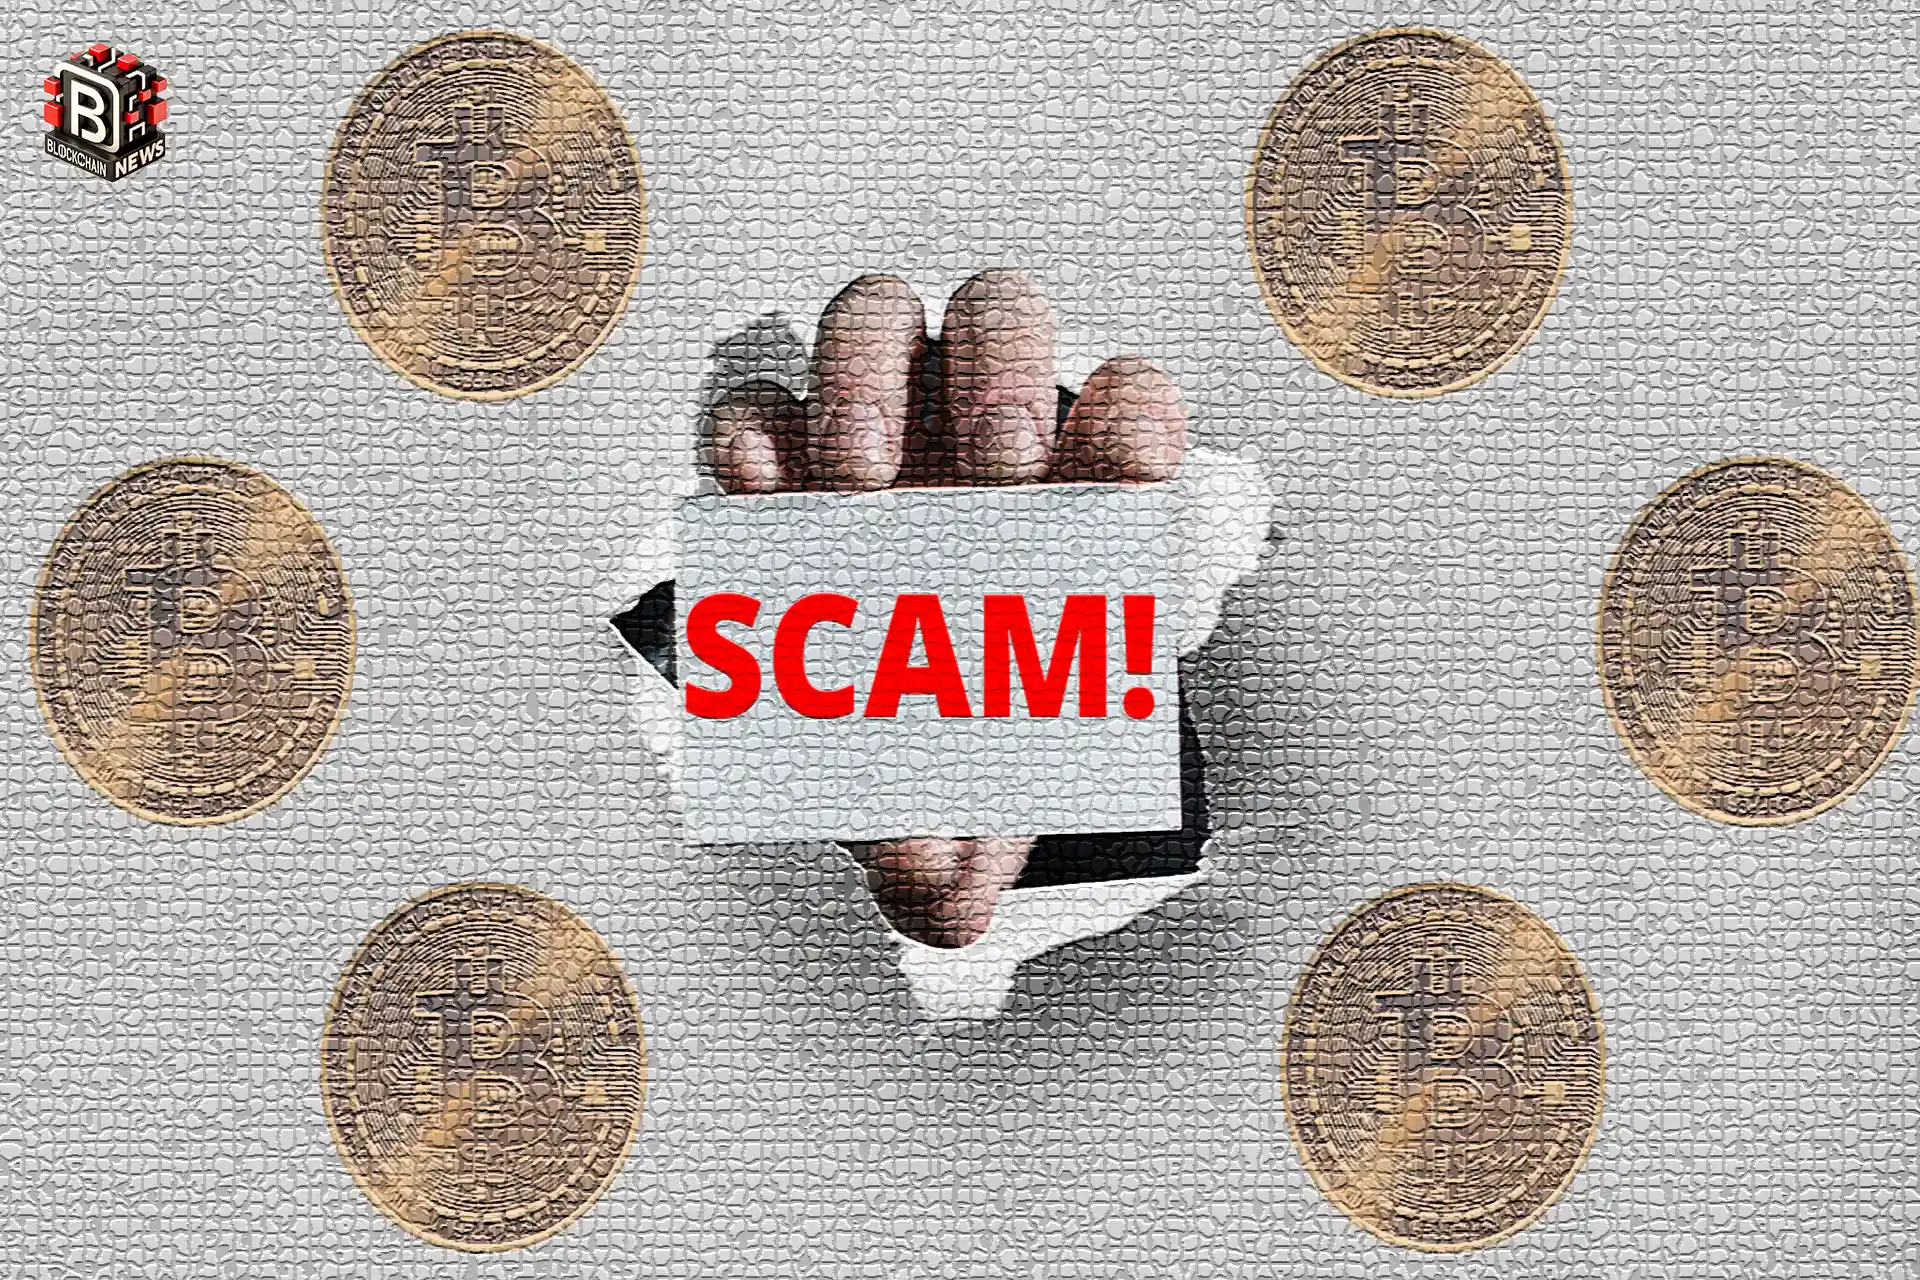 Bitcoin-scam-want-their-money-back-from-the-UK